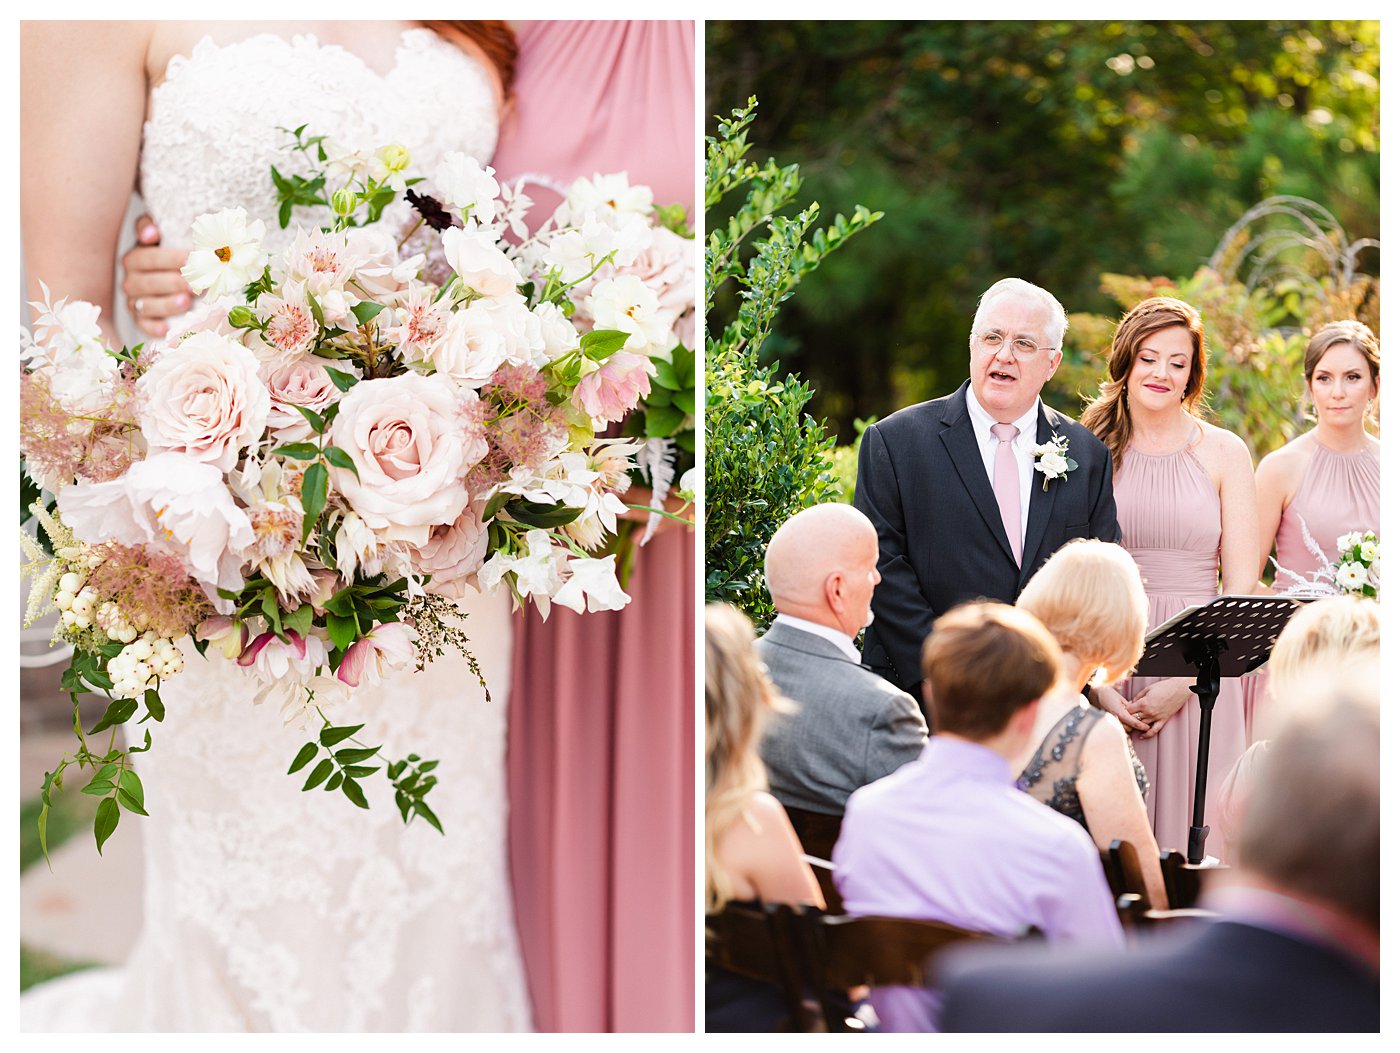 Romantic Textured Bouquets by Amanda and Grady